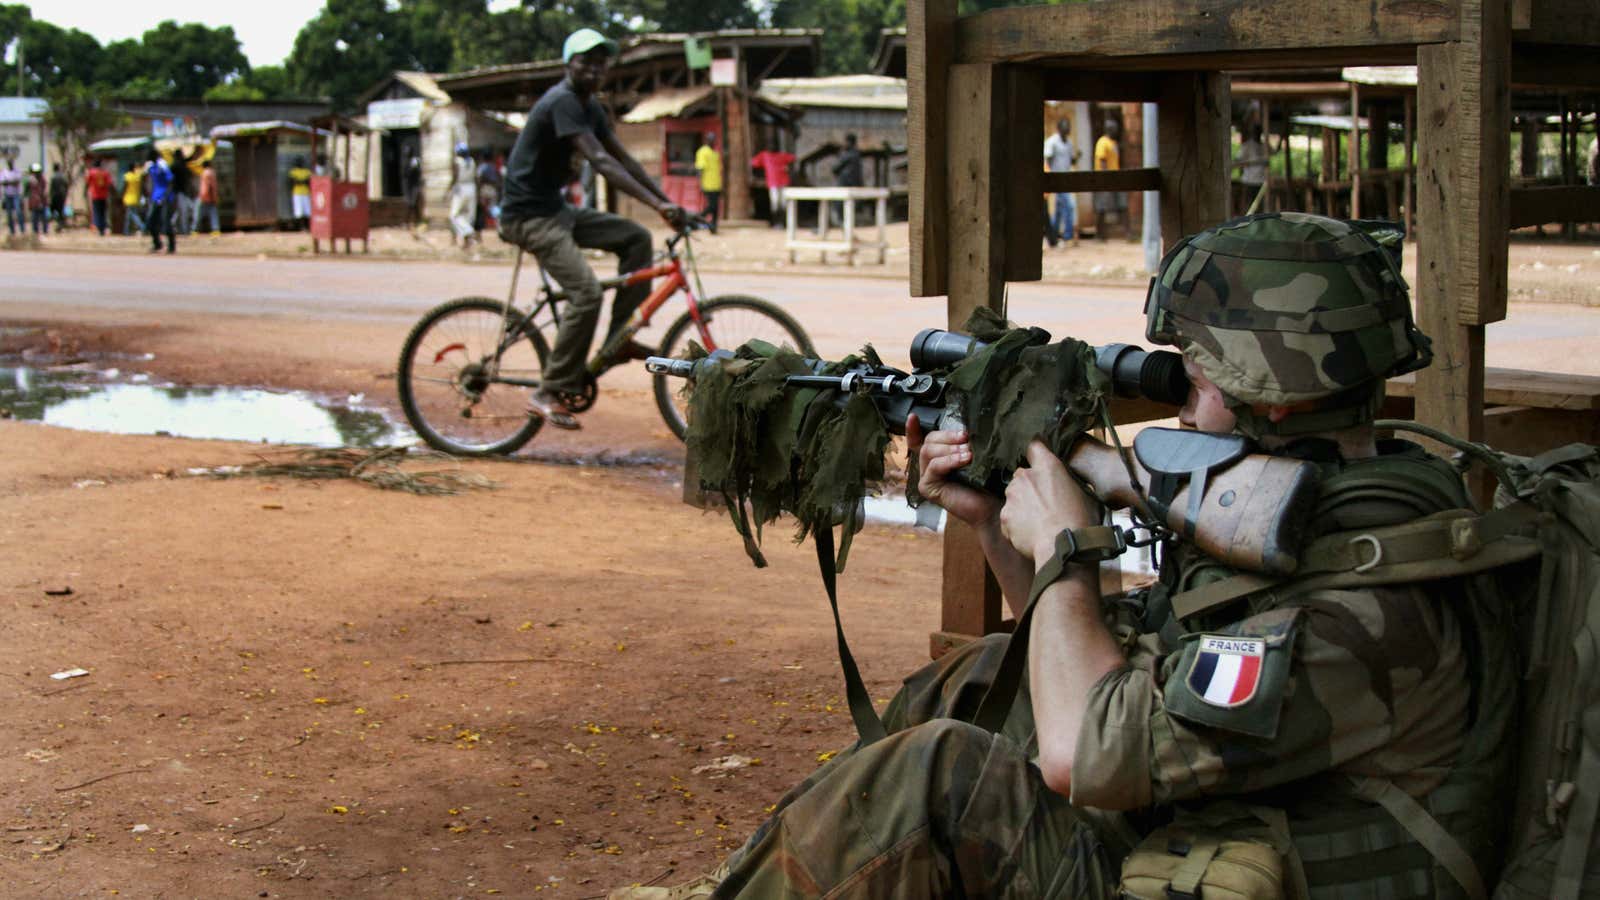 Foreign troops in Central Africa Rep are getting in the news for wrong reasons